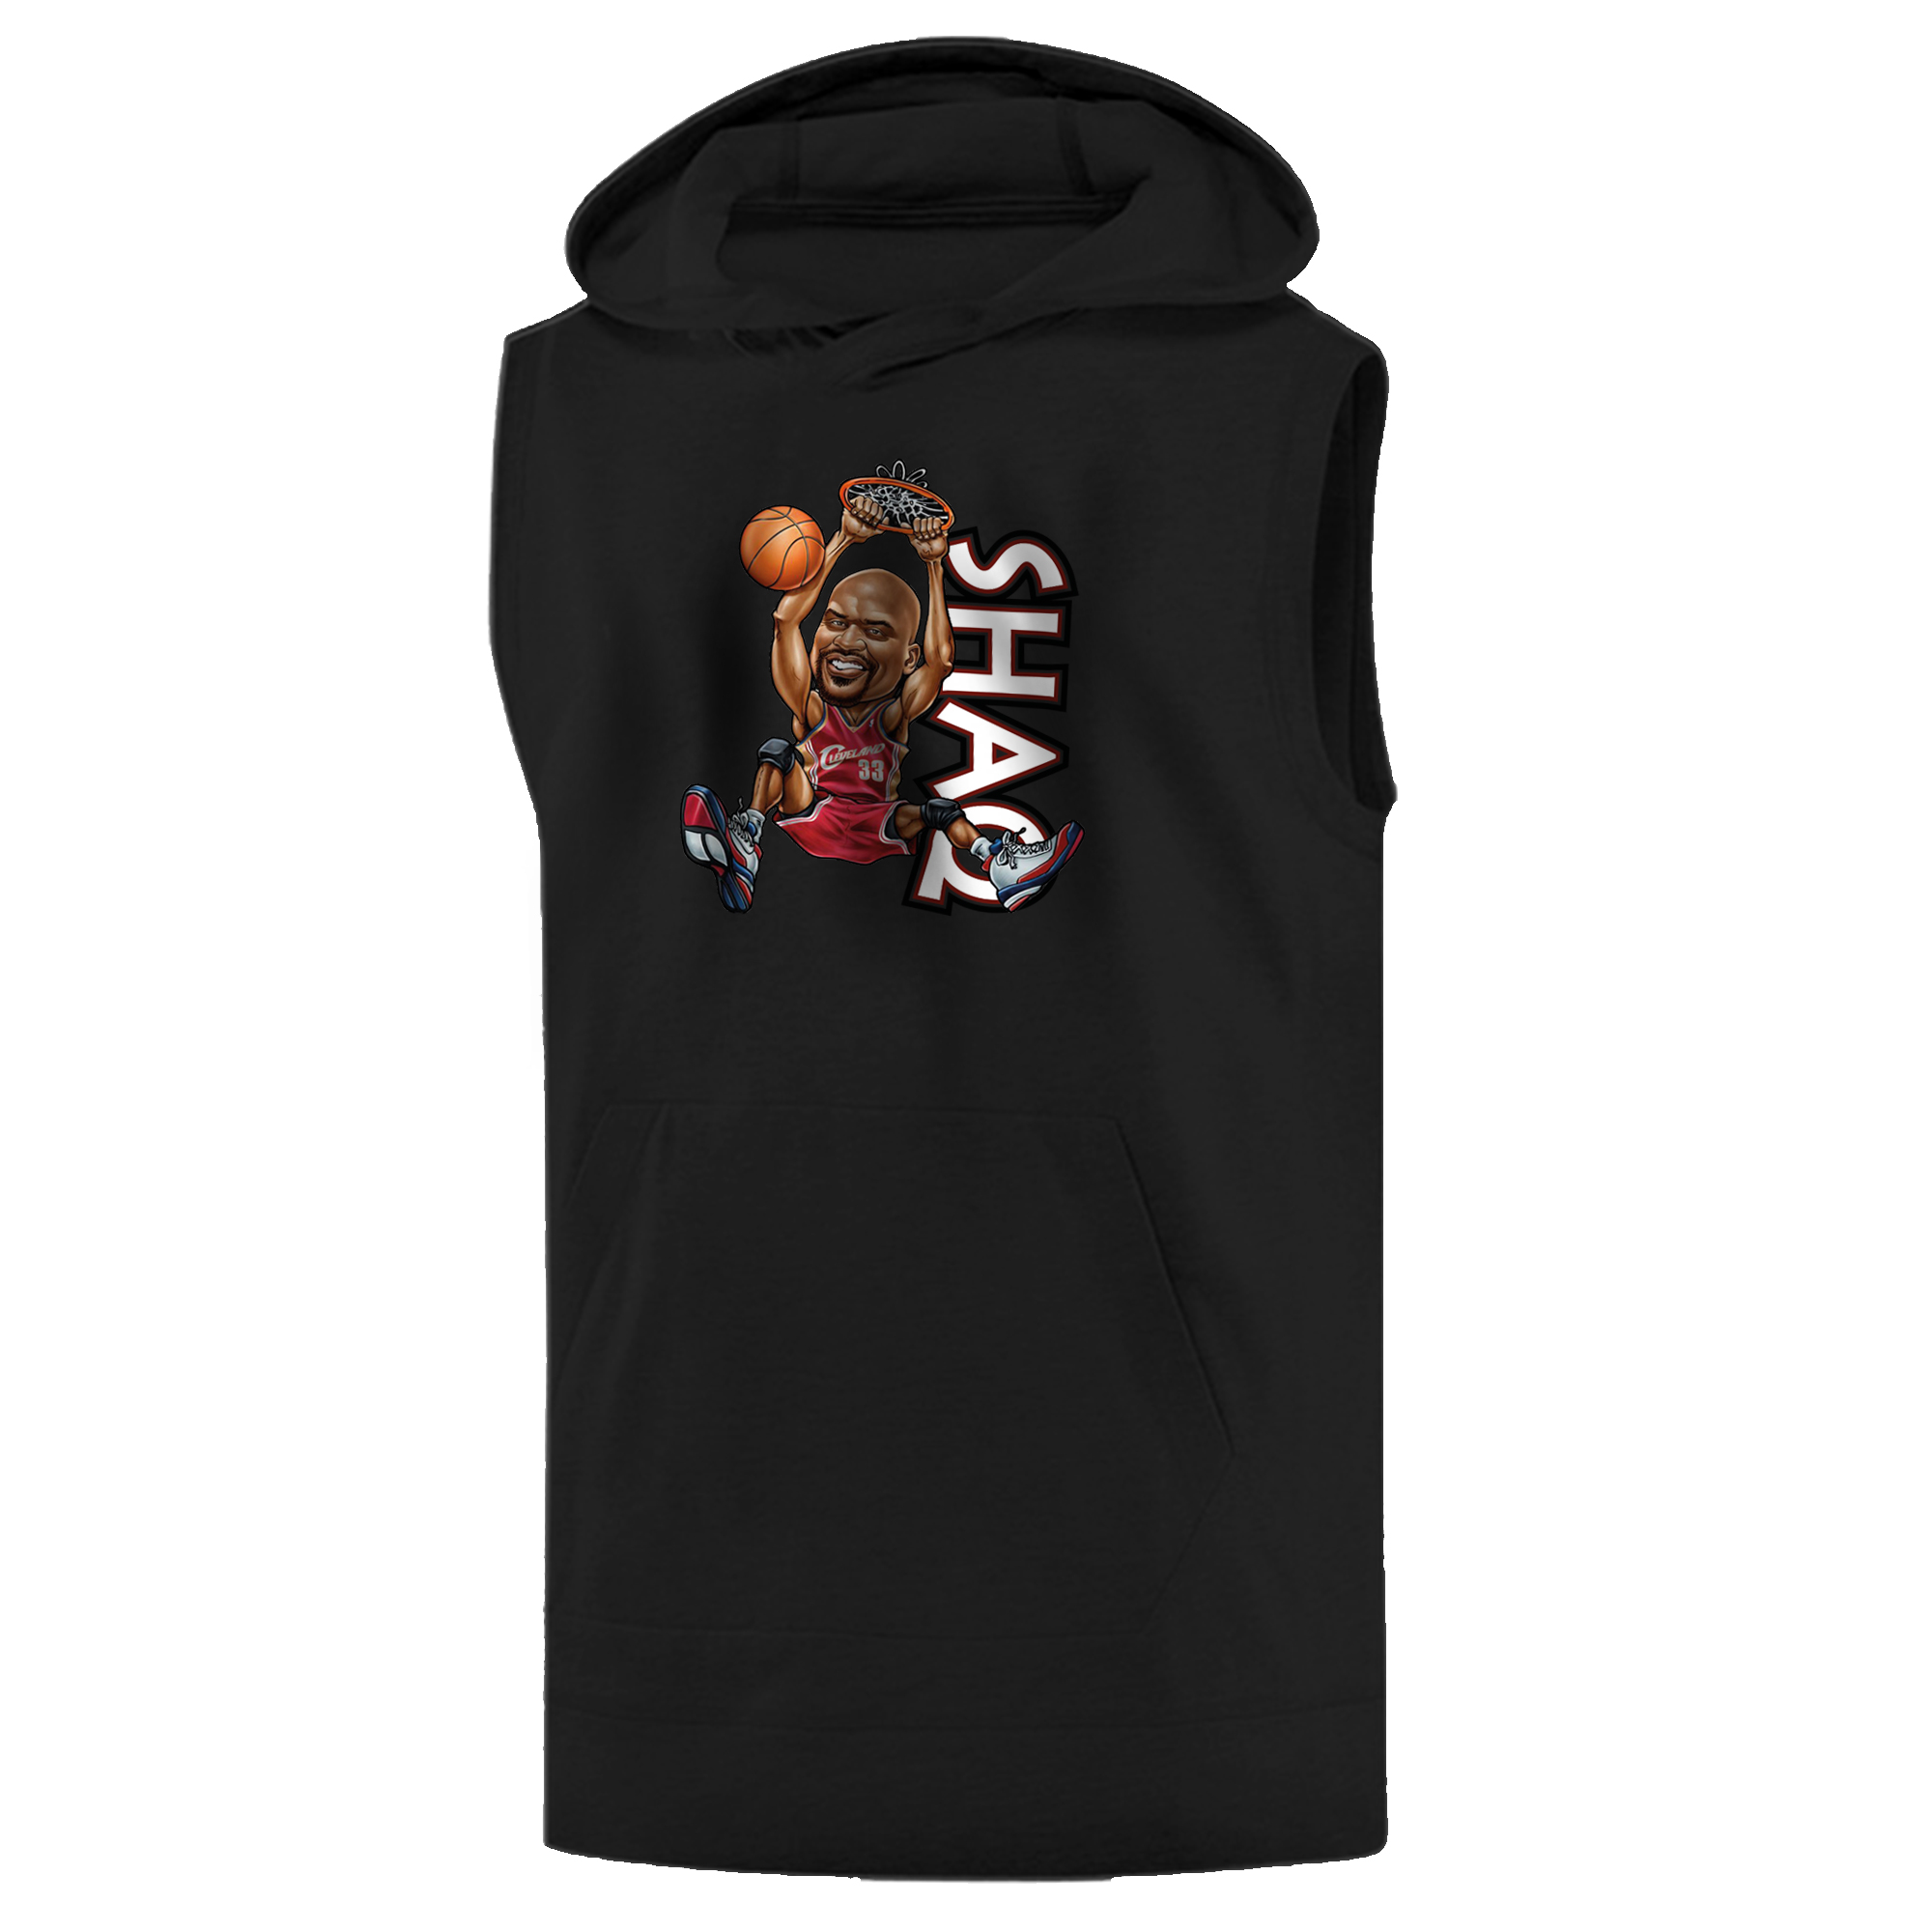 Shaquille O'Neal Sleeveless (KLS-GRY-721-ShaquilleO'Neal)